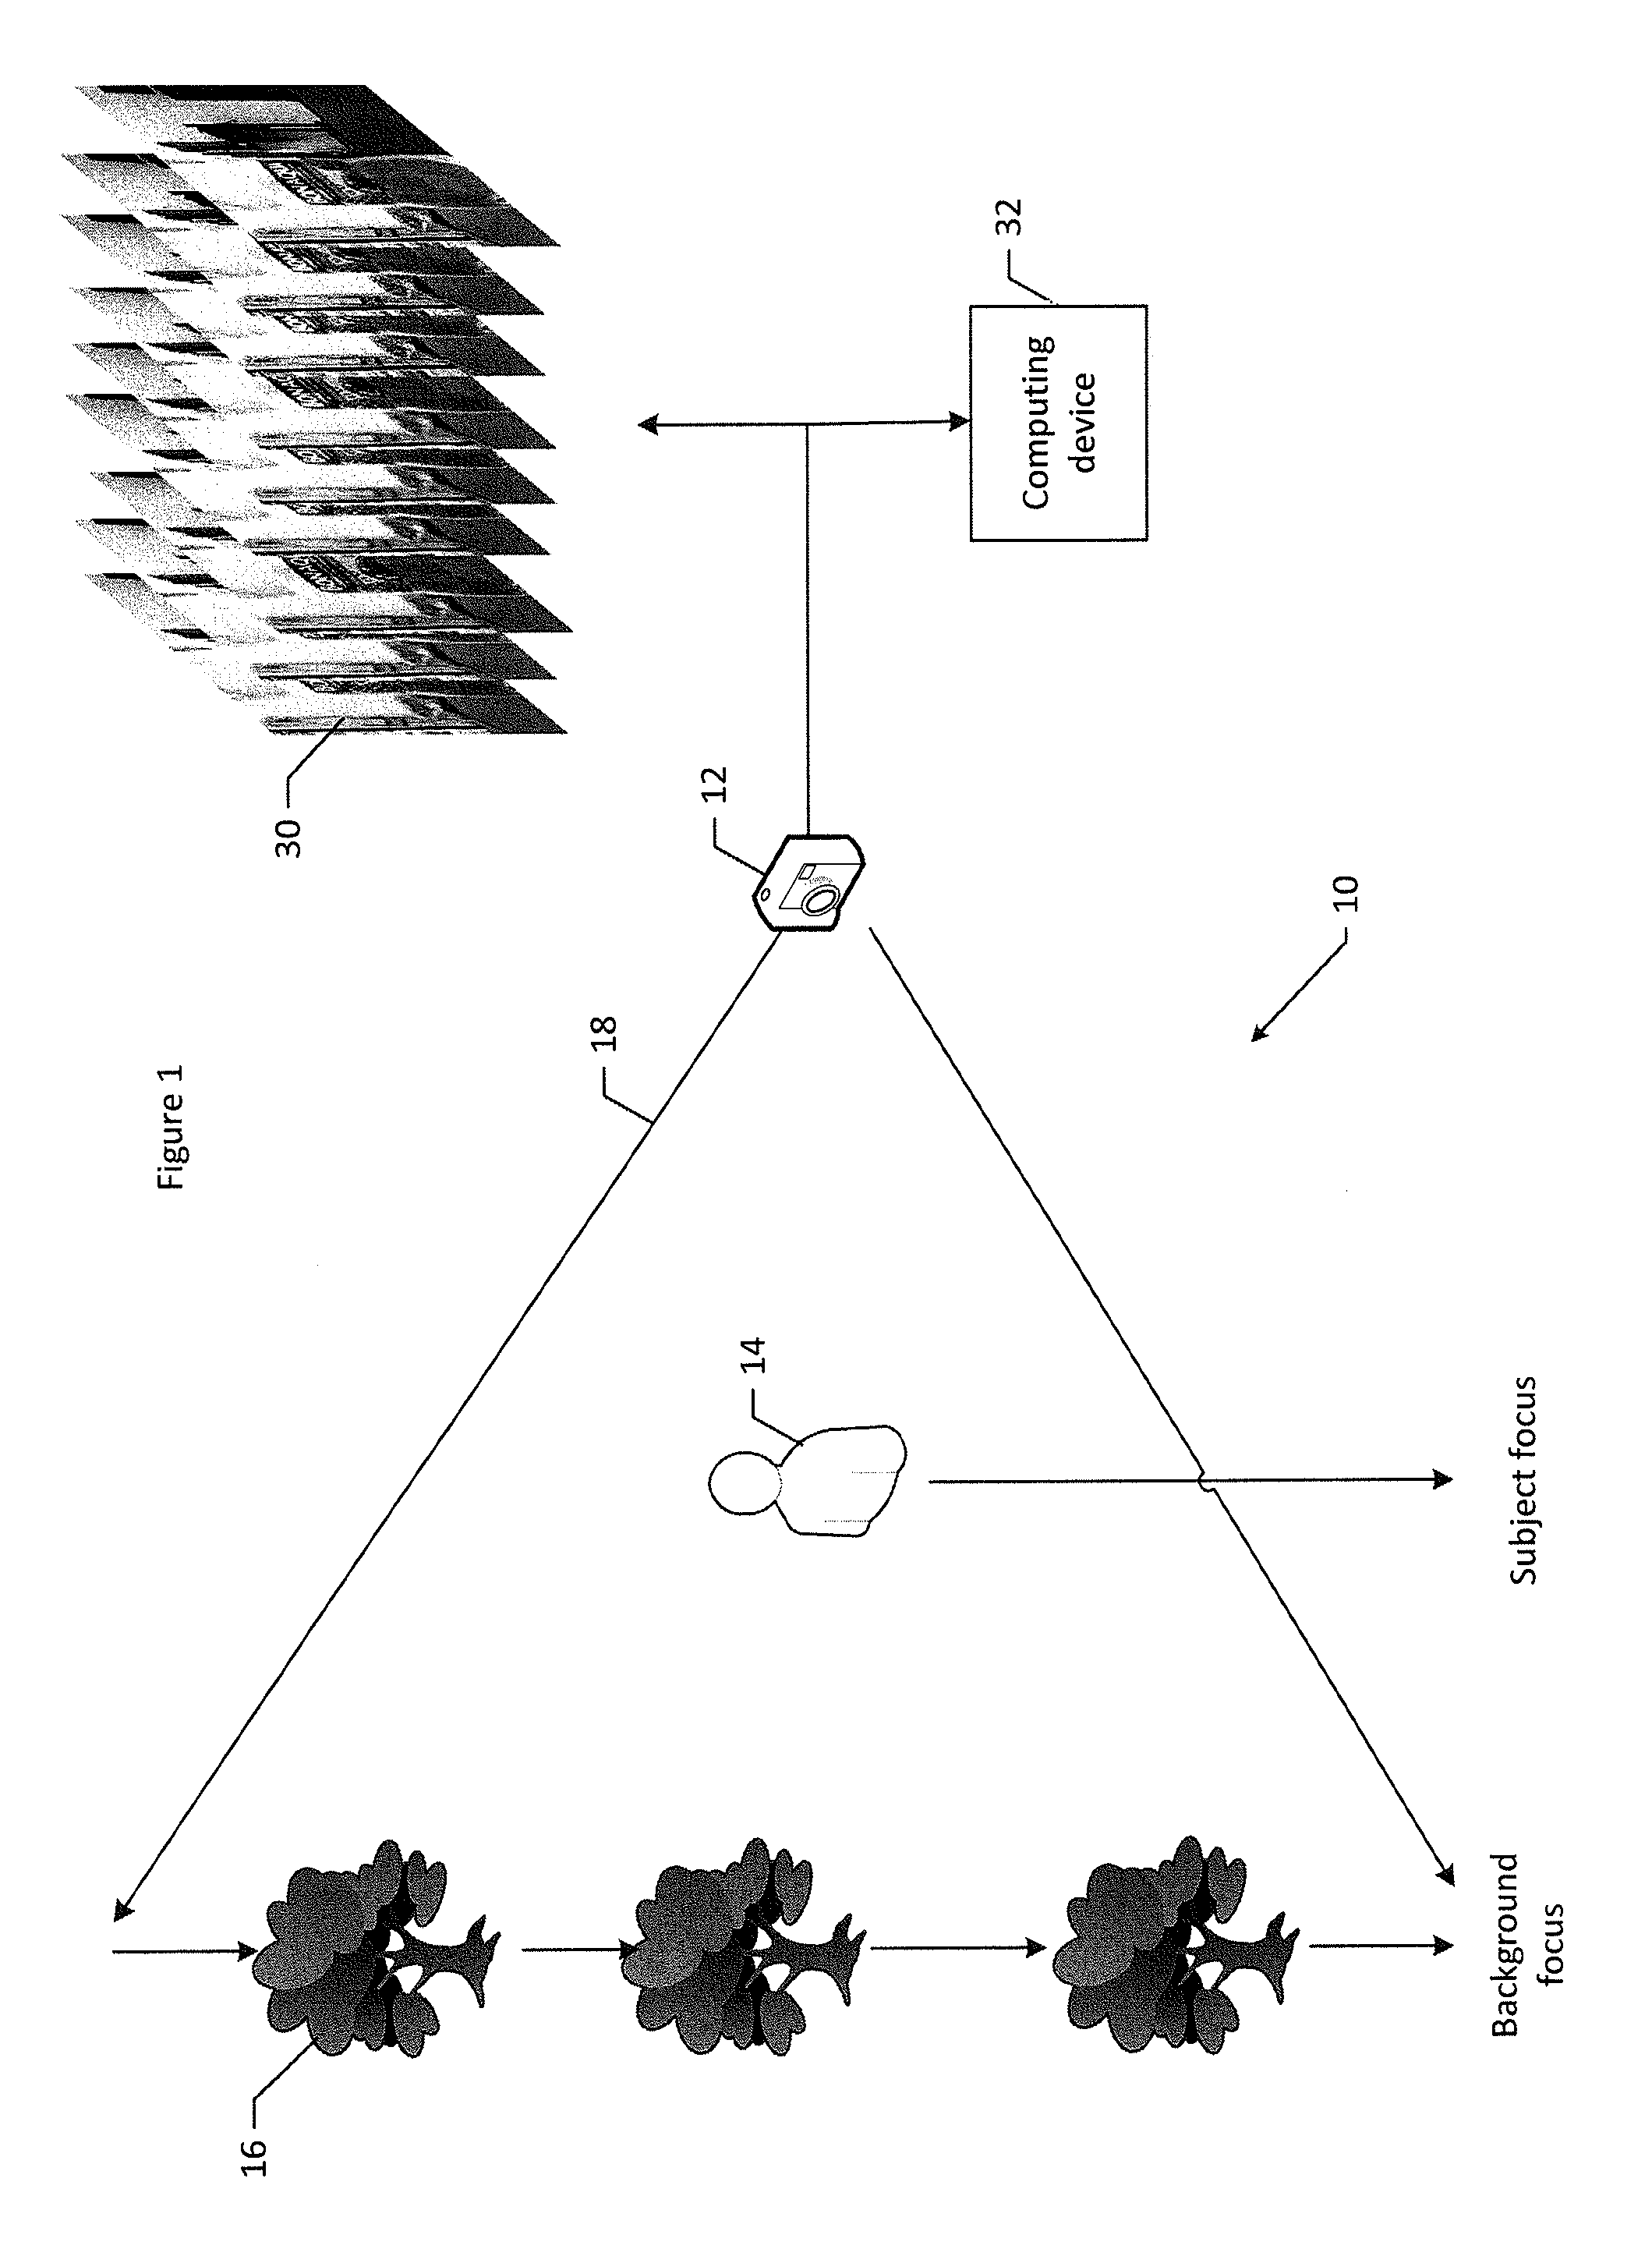 Method and apparatus for scene segmentation from focal stack images